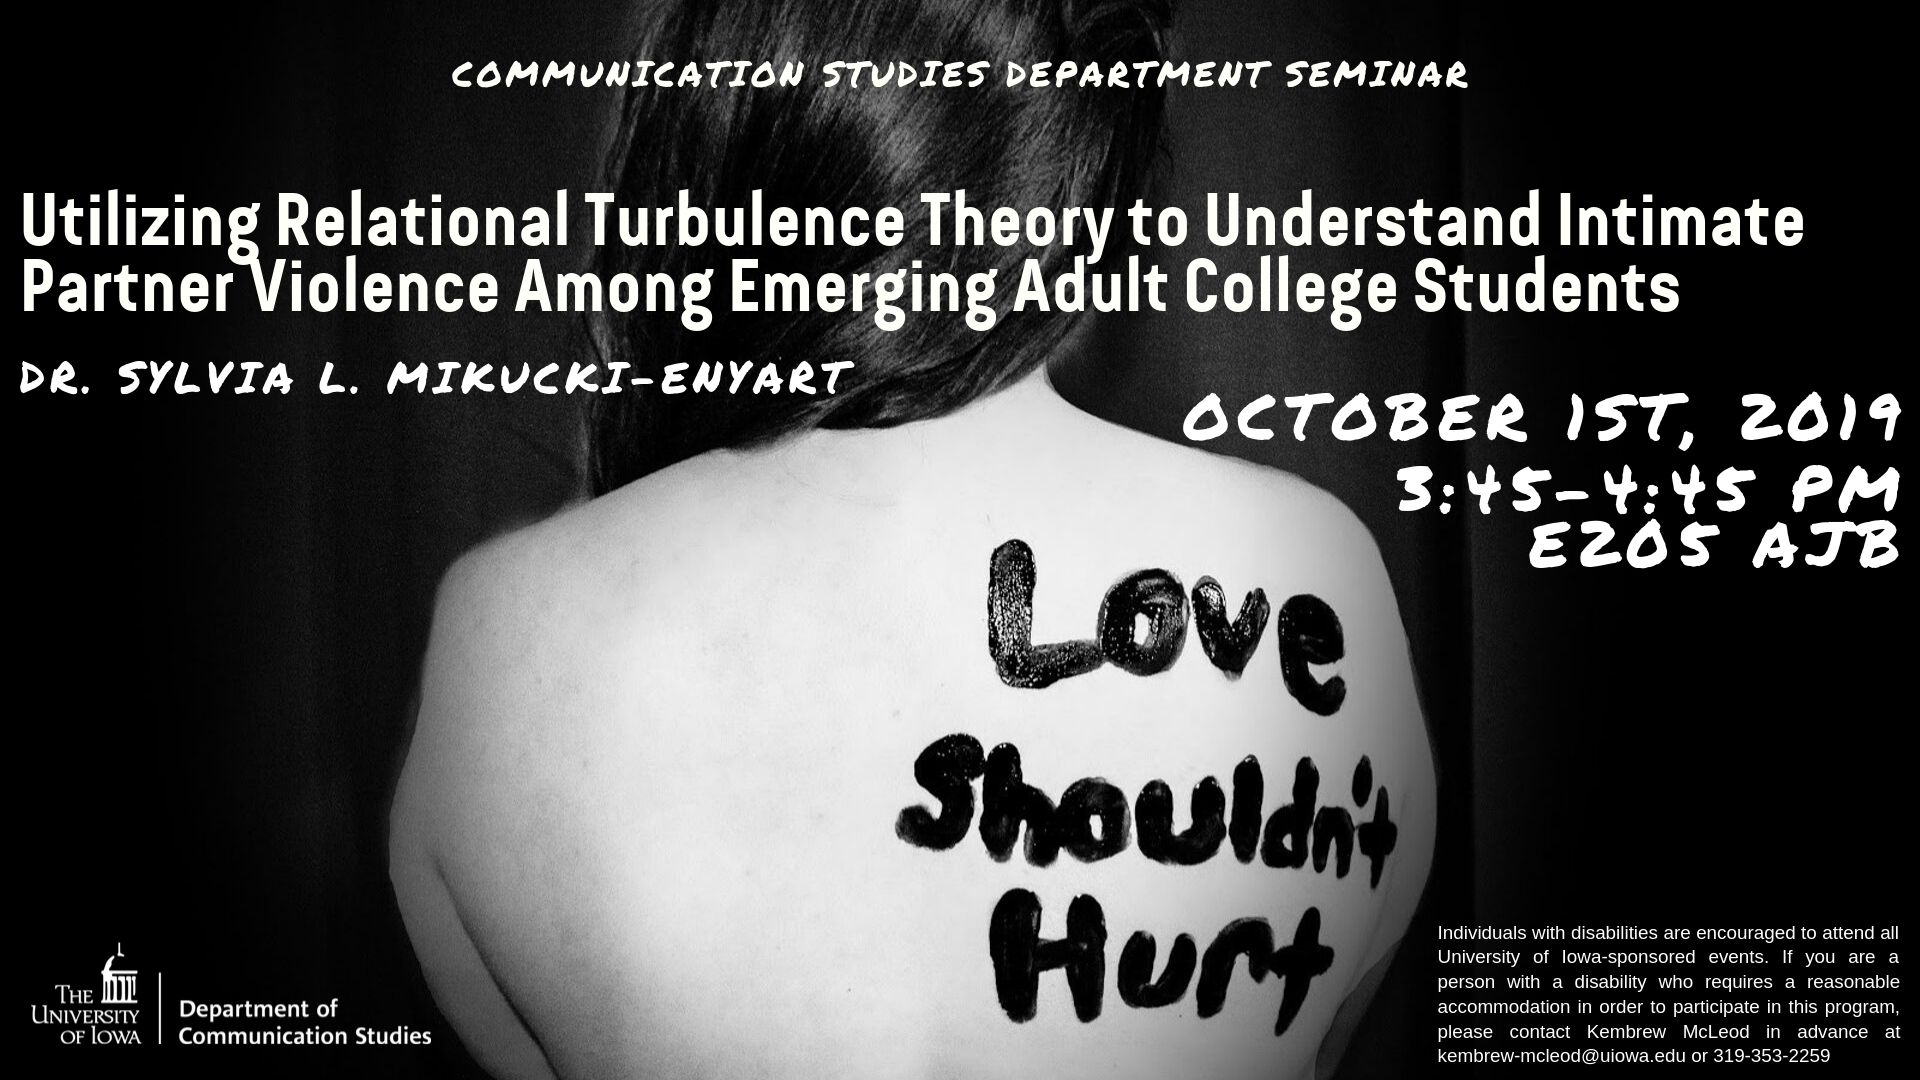 Utilizing Relational Turbulence Theory to Understand Intimate Partner Violence Among Emerging Adult College Students